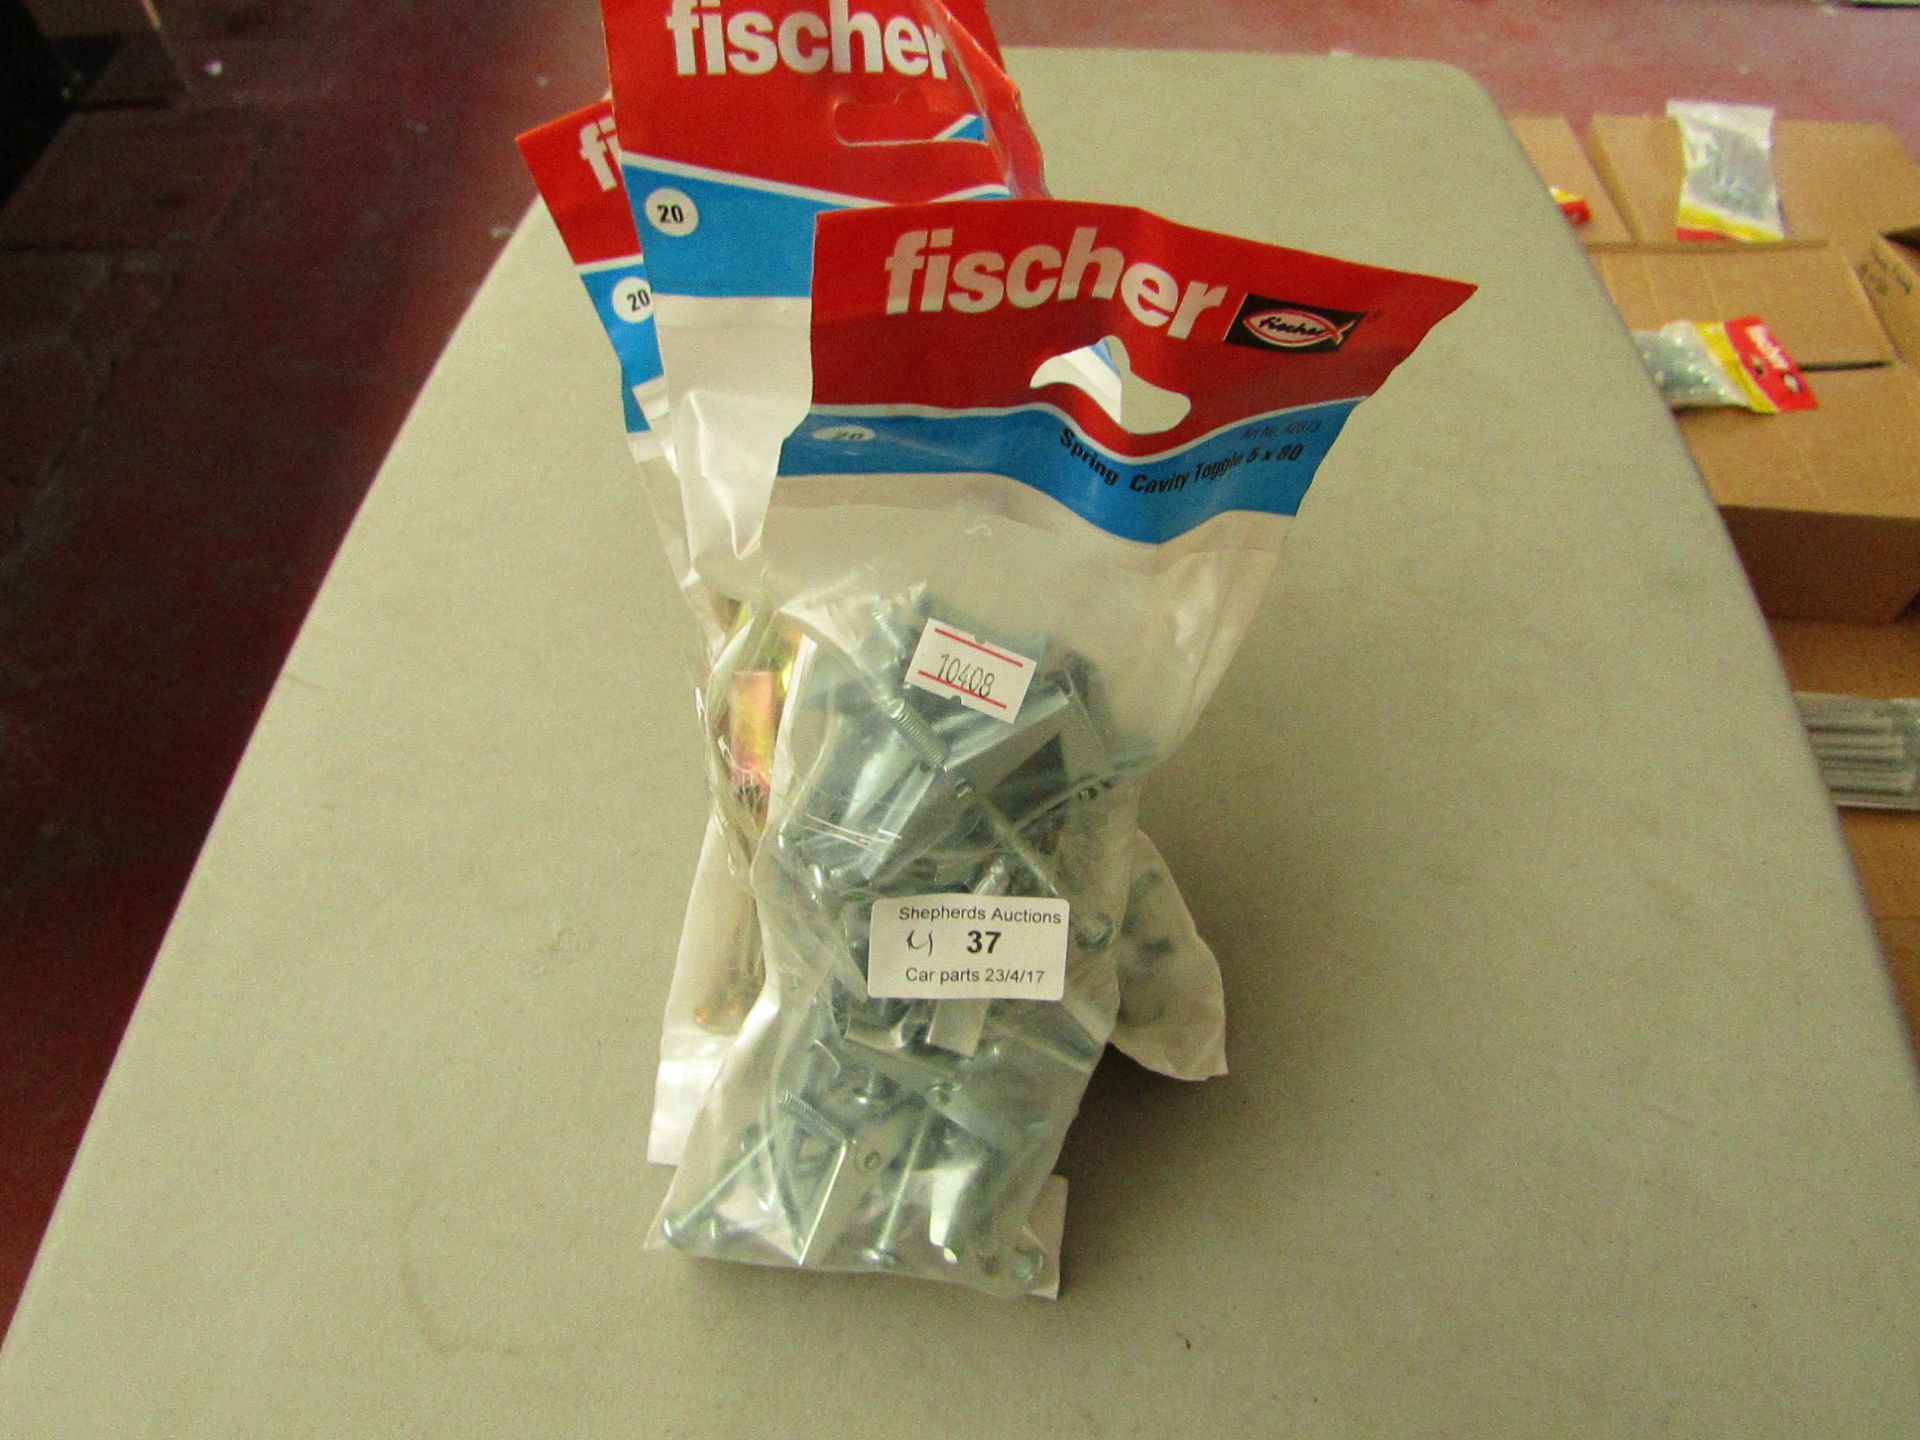 4x Packs of 20 Fischer spring cavity toggle 5 x 80, all new and packaged.